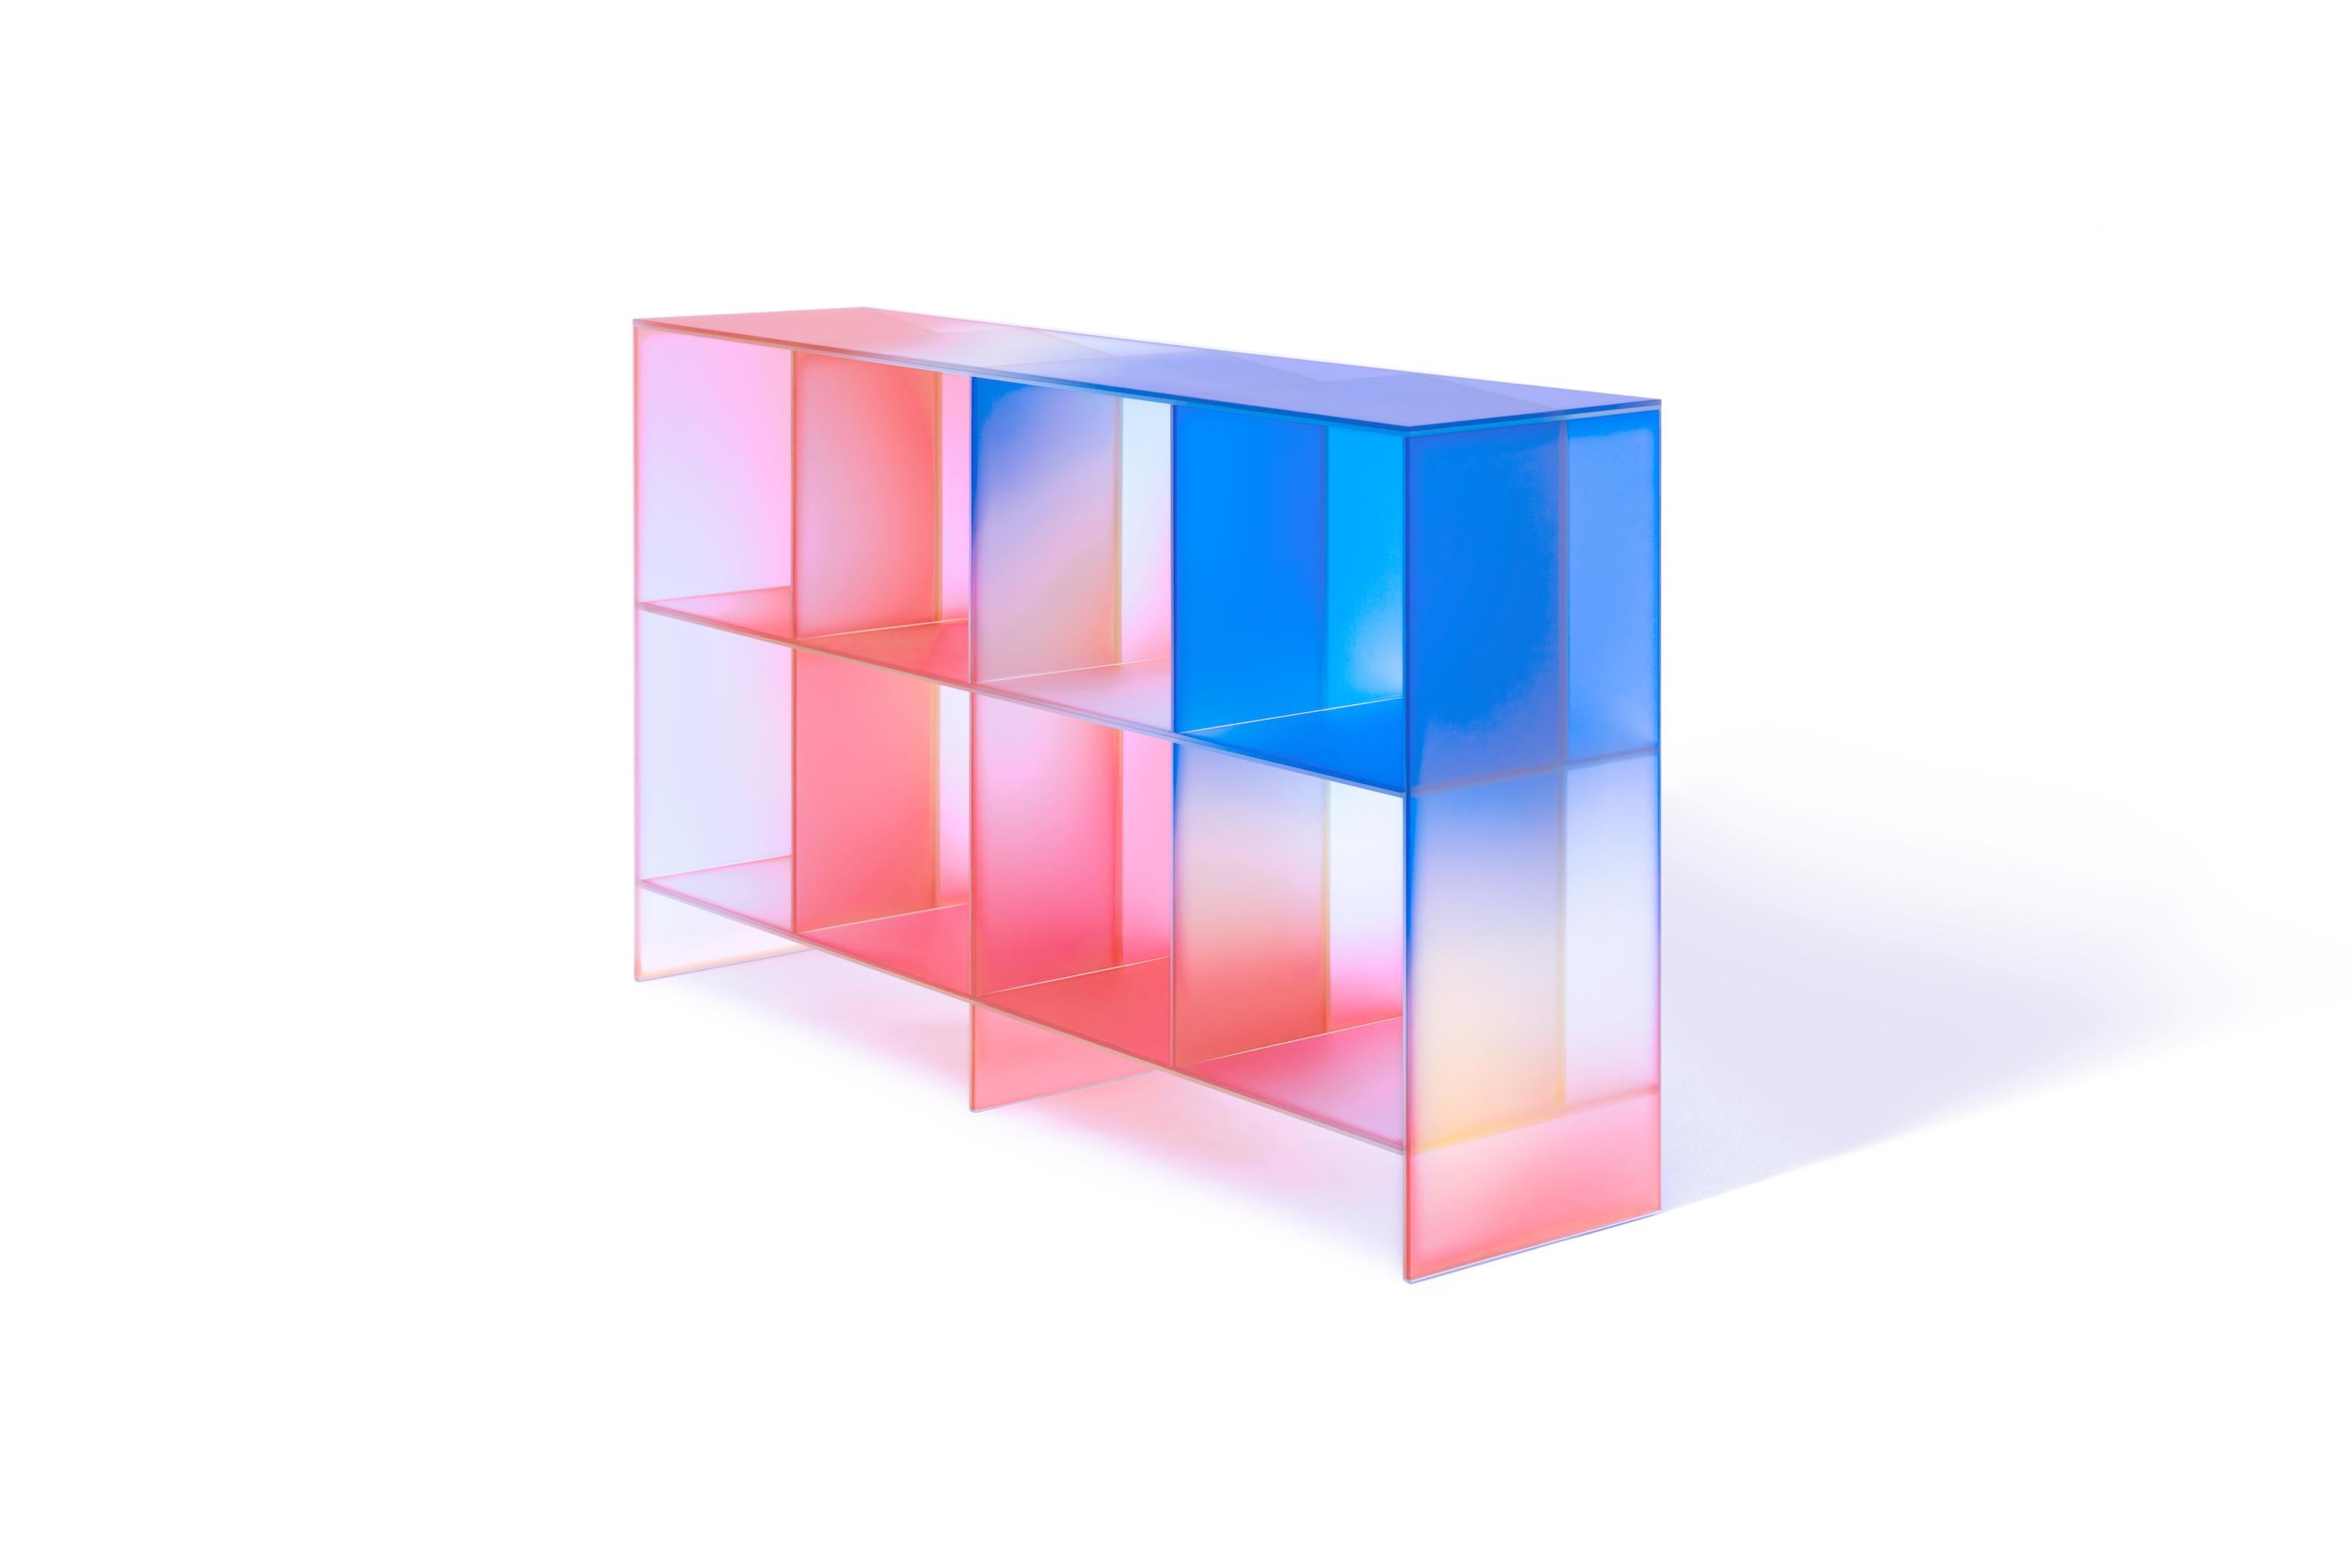 Chinese Gradient Color Glass Low Display Case by Studio Buzao